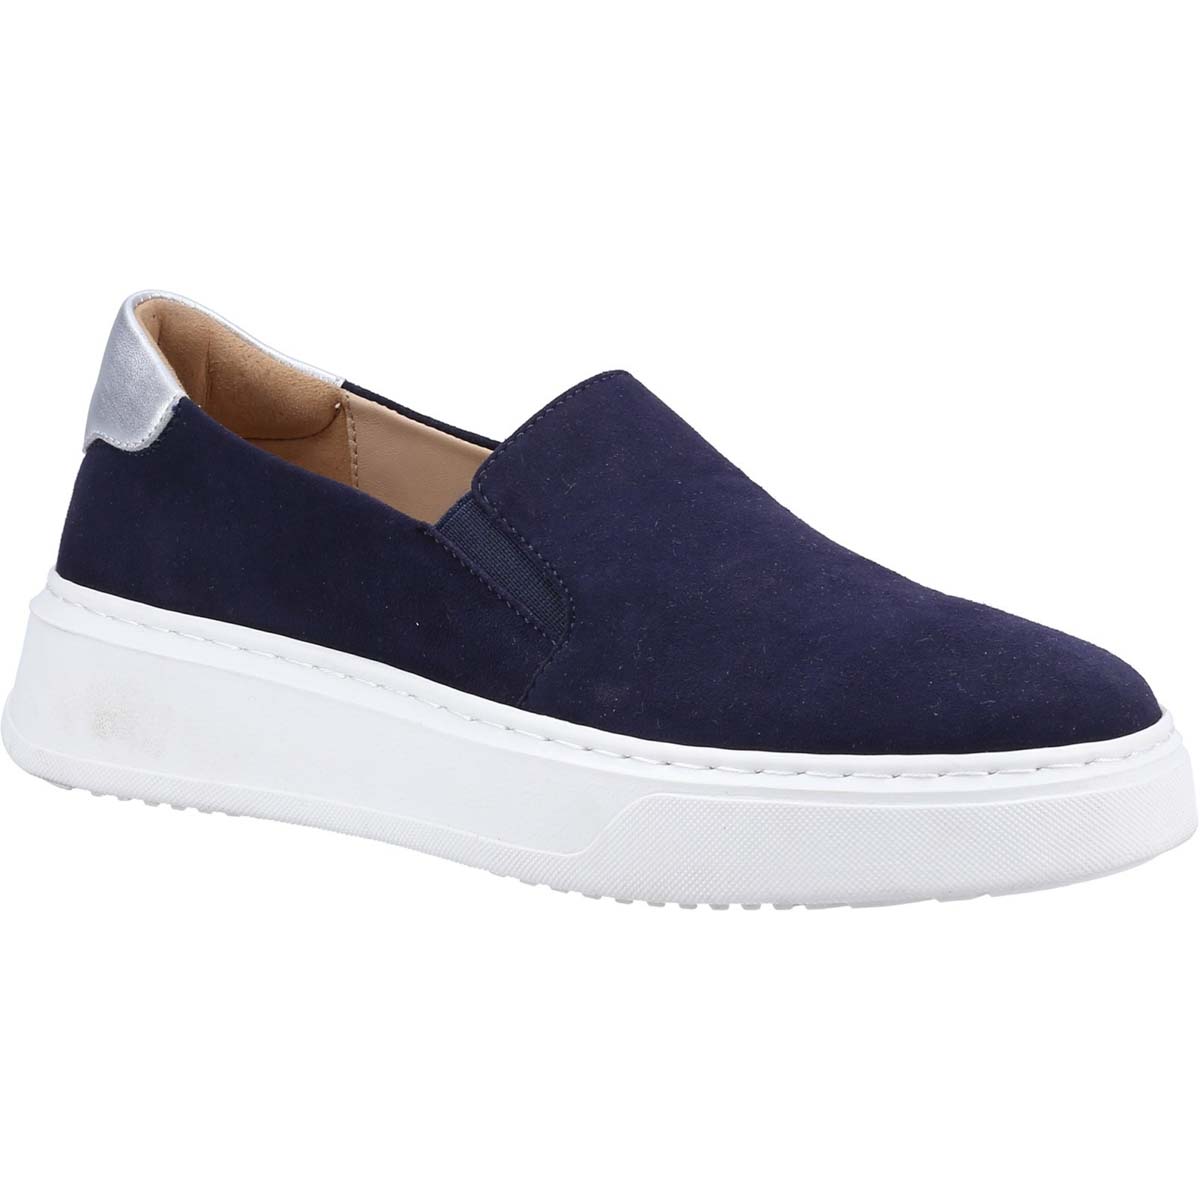 Hush Puppies Corinne Navy Womens Comfort Slip On Shoes 36597-68241 in a Plain Leather in Size 8